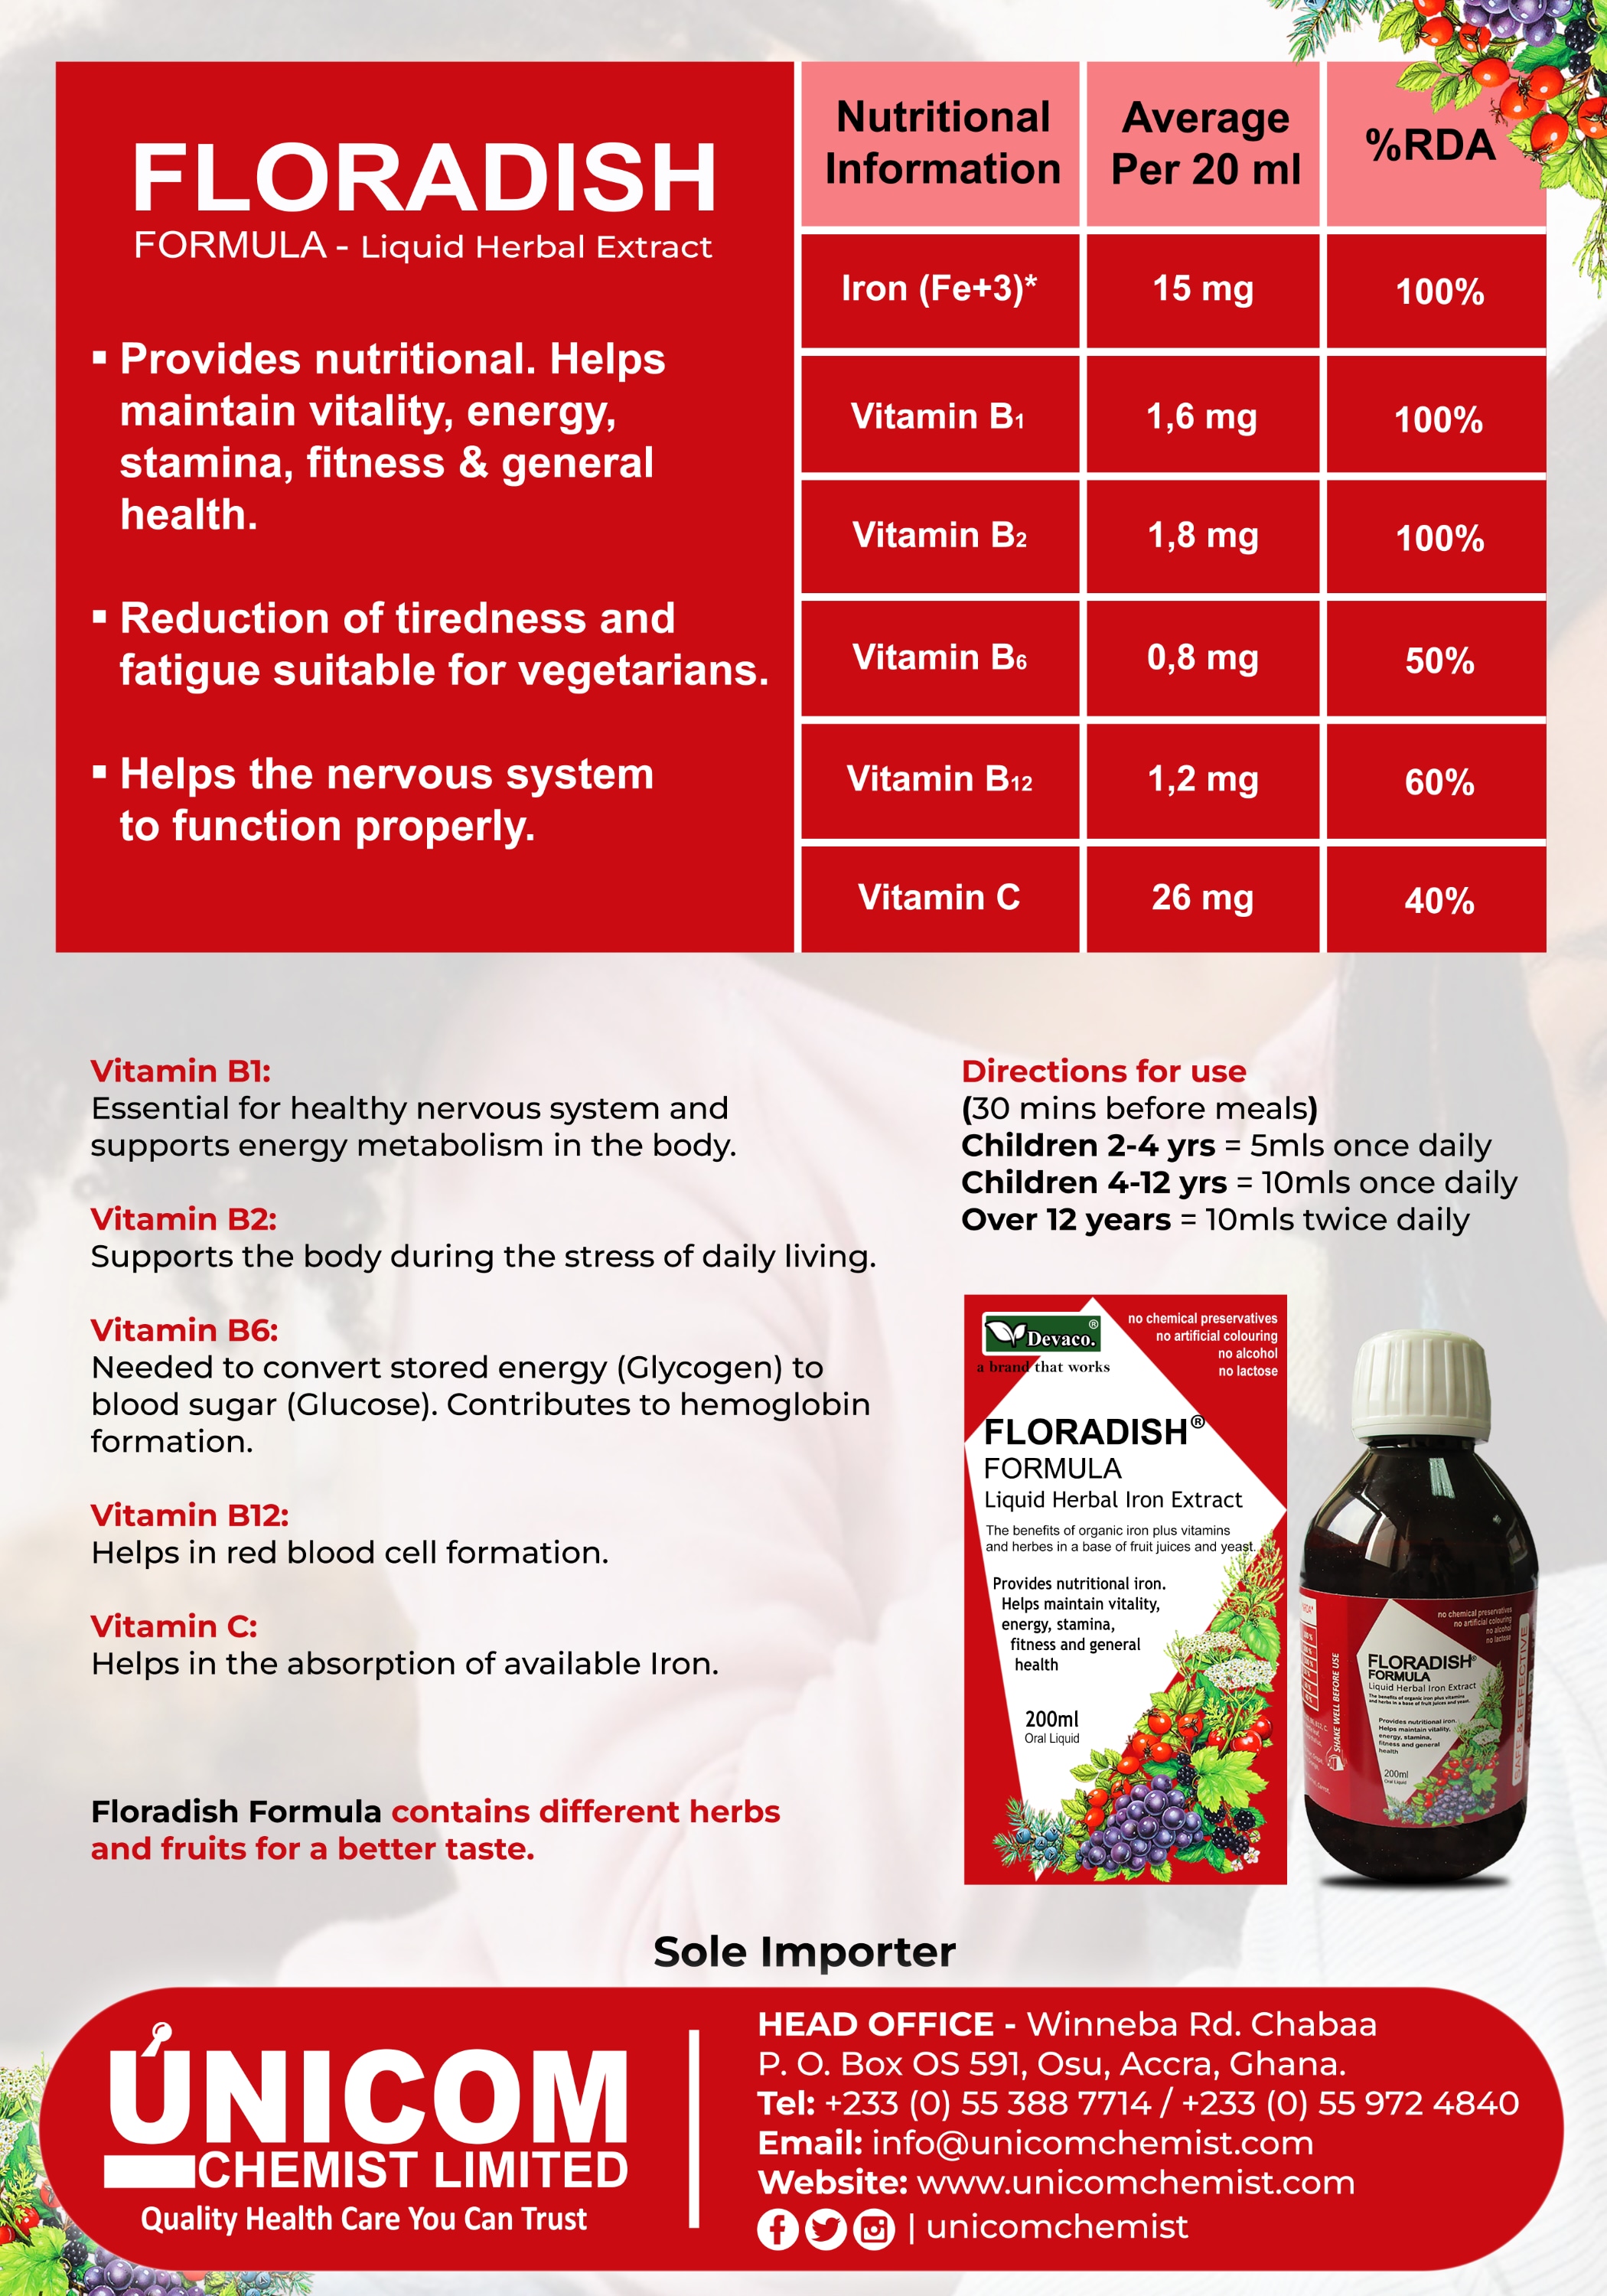 Floradish Formula: An innovative solution for people living with iron deficiency